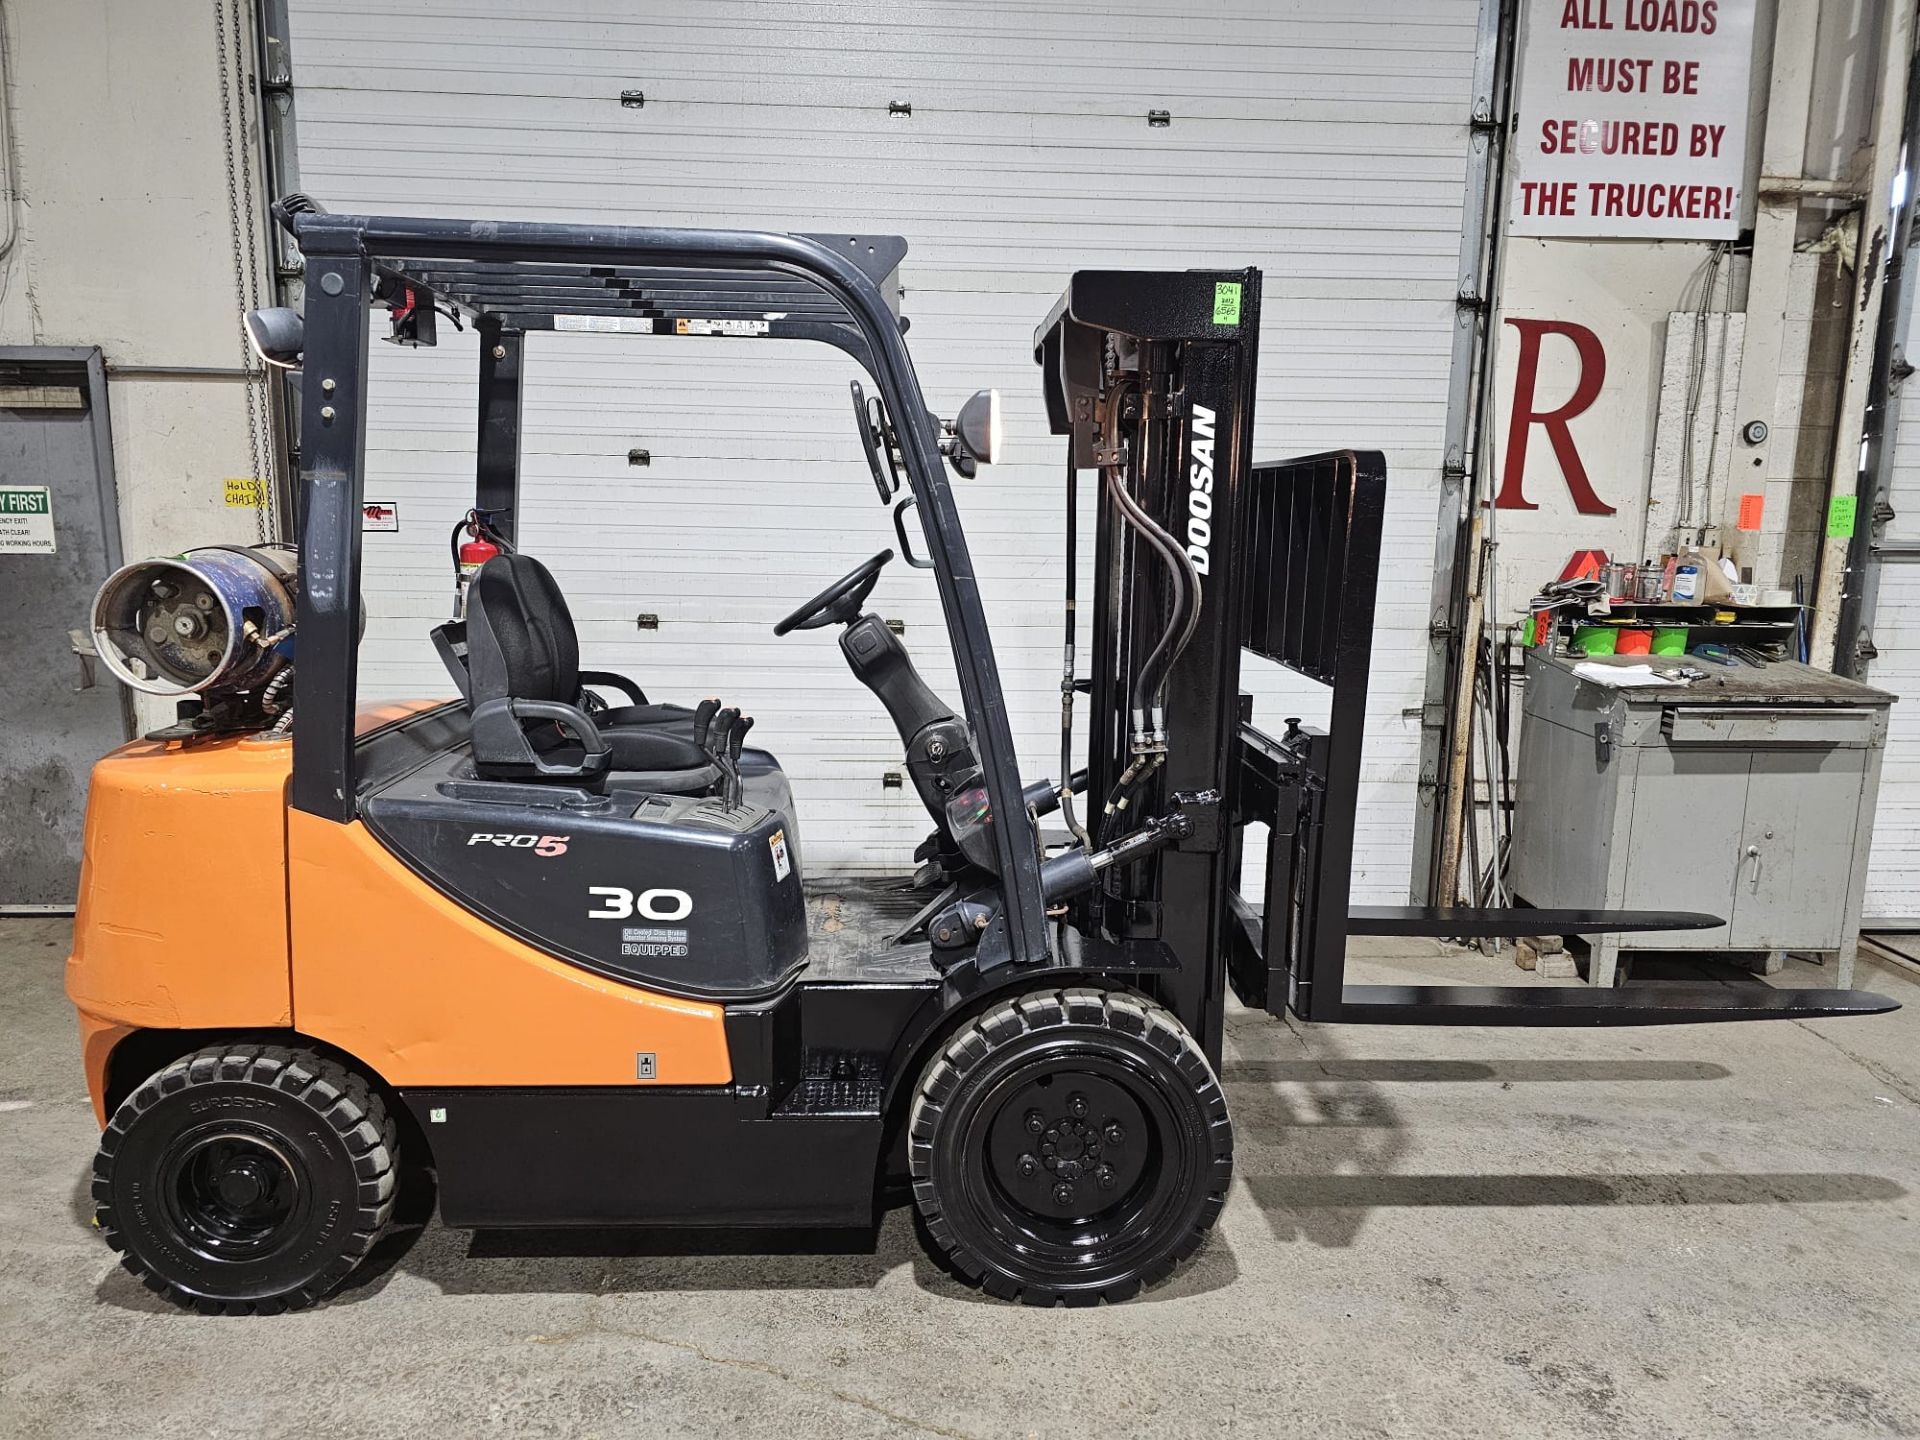 2012 Doosan 6,000lbs Capacity OUTDOOR LPG (Propane) with LOW HOURS Forklift 3-stage 189" load height